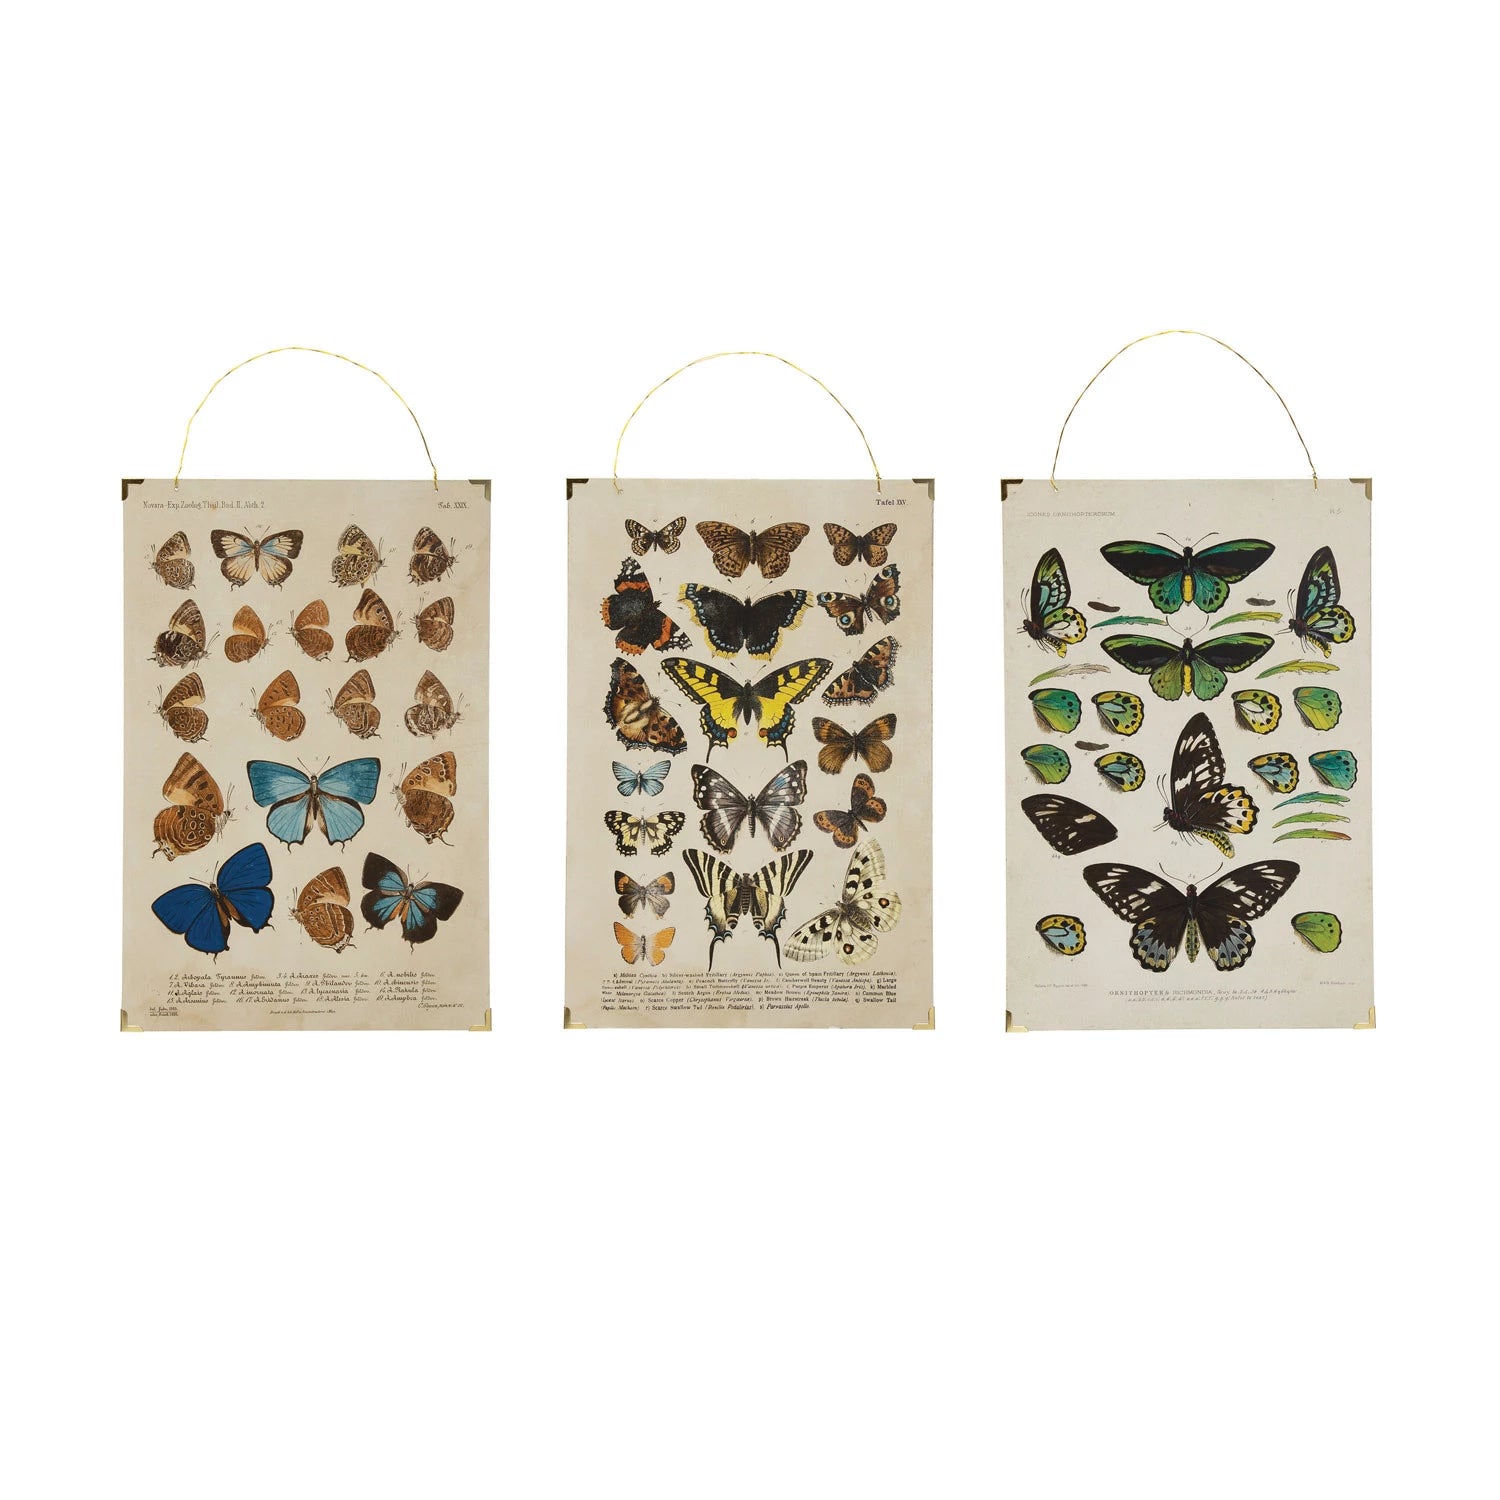 all three styles of vintage reproduction butterflies and paper wall decor displayed against a white background